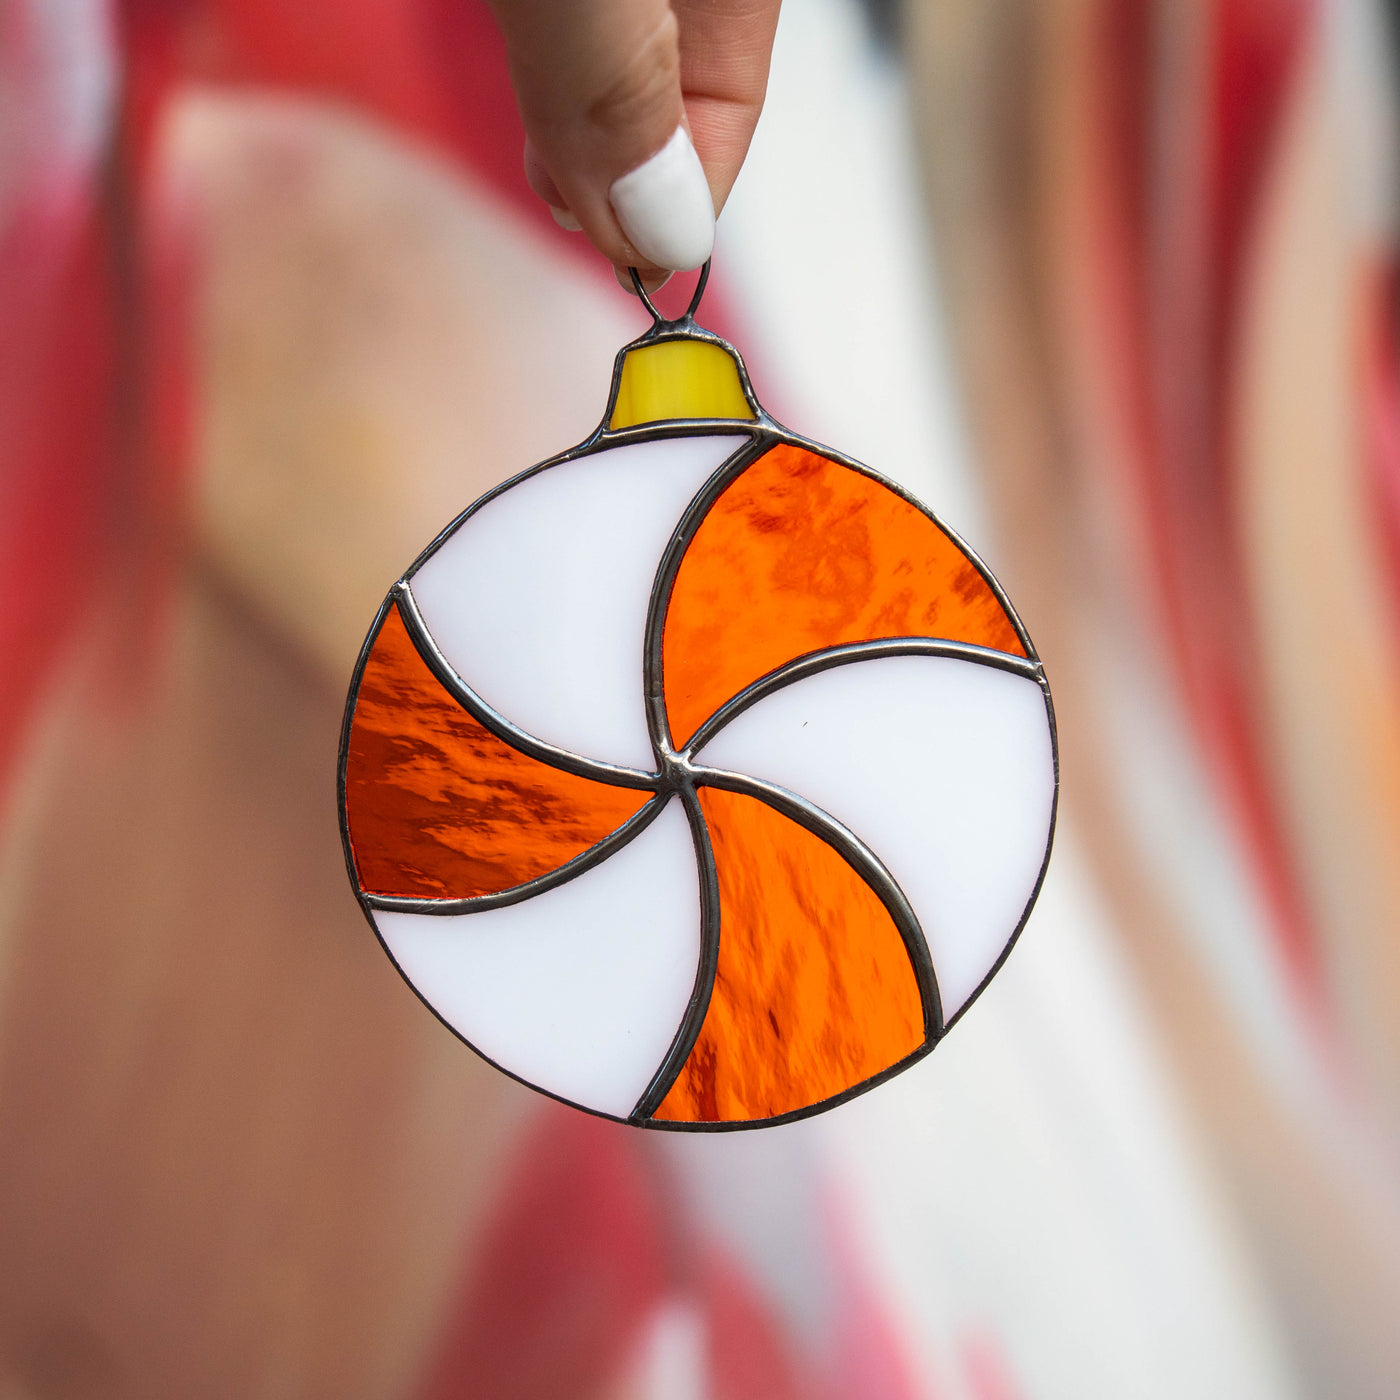 Round white and orange candy suncatcher of stained glass for Christmas decor